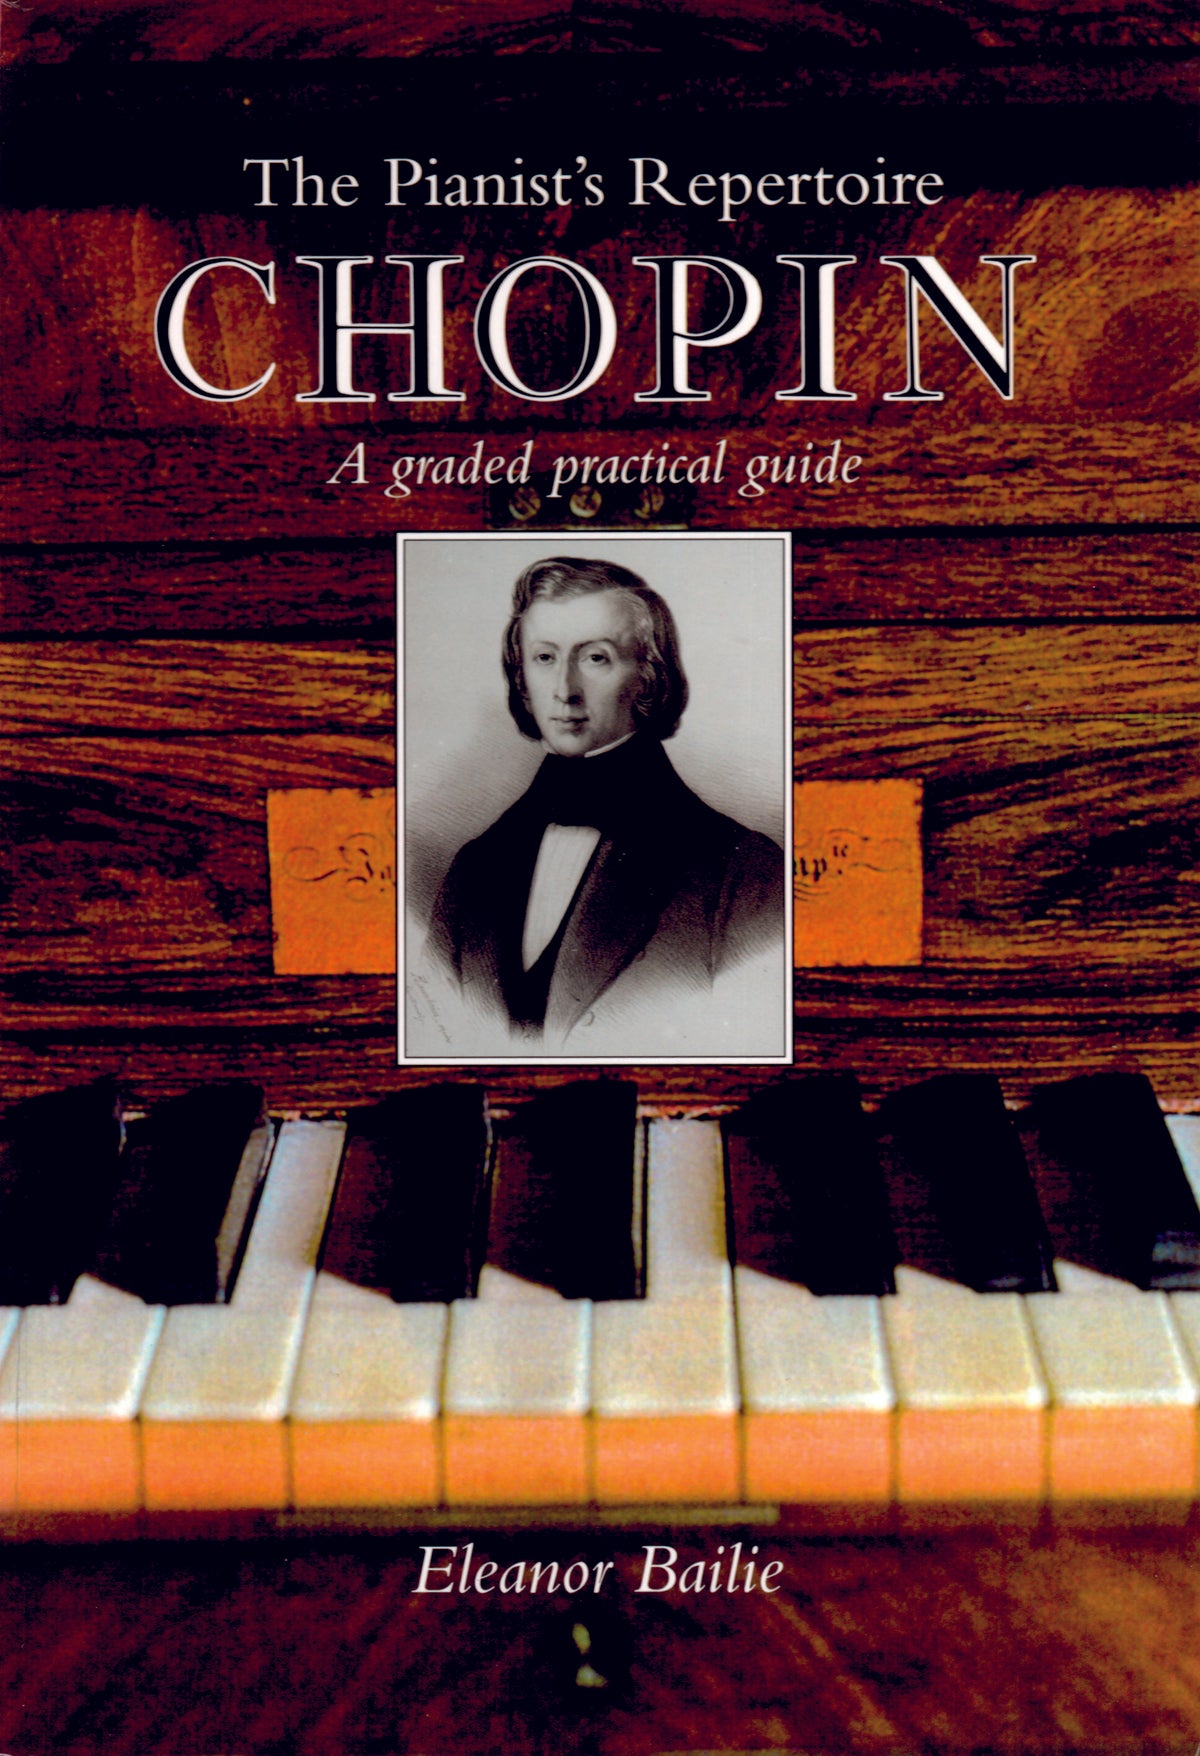 The Pianist's Repertoire: Chopin